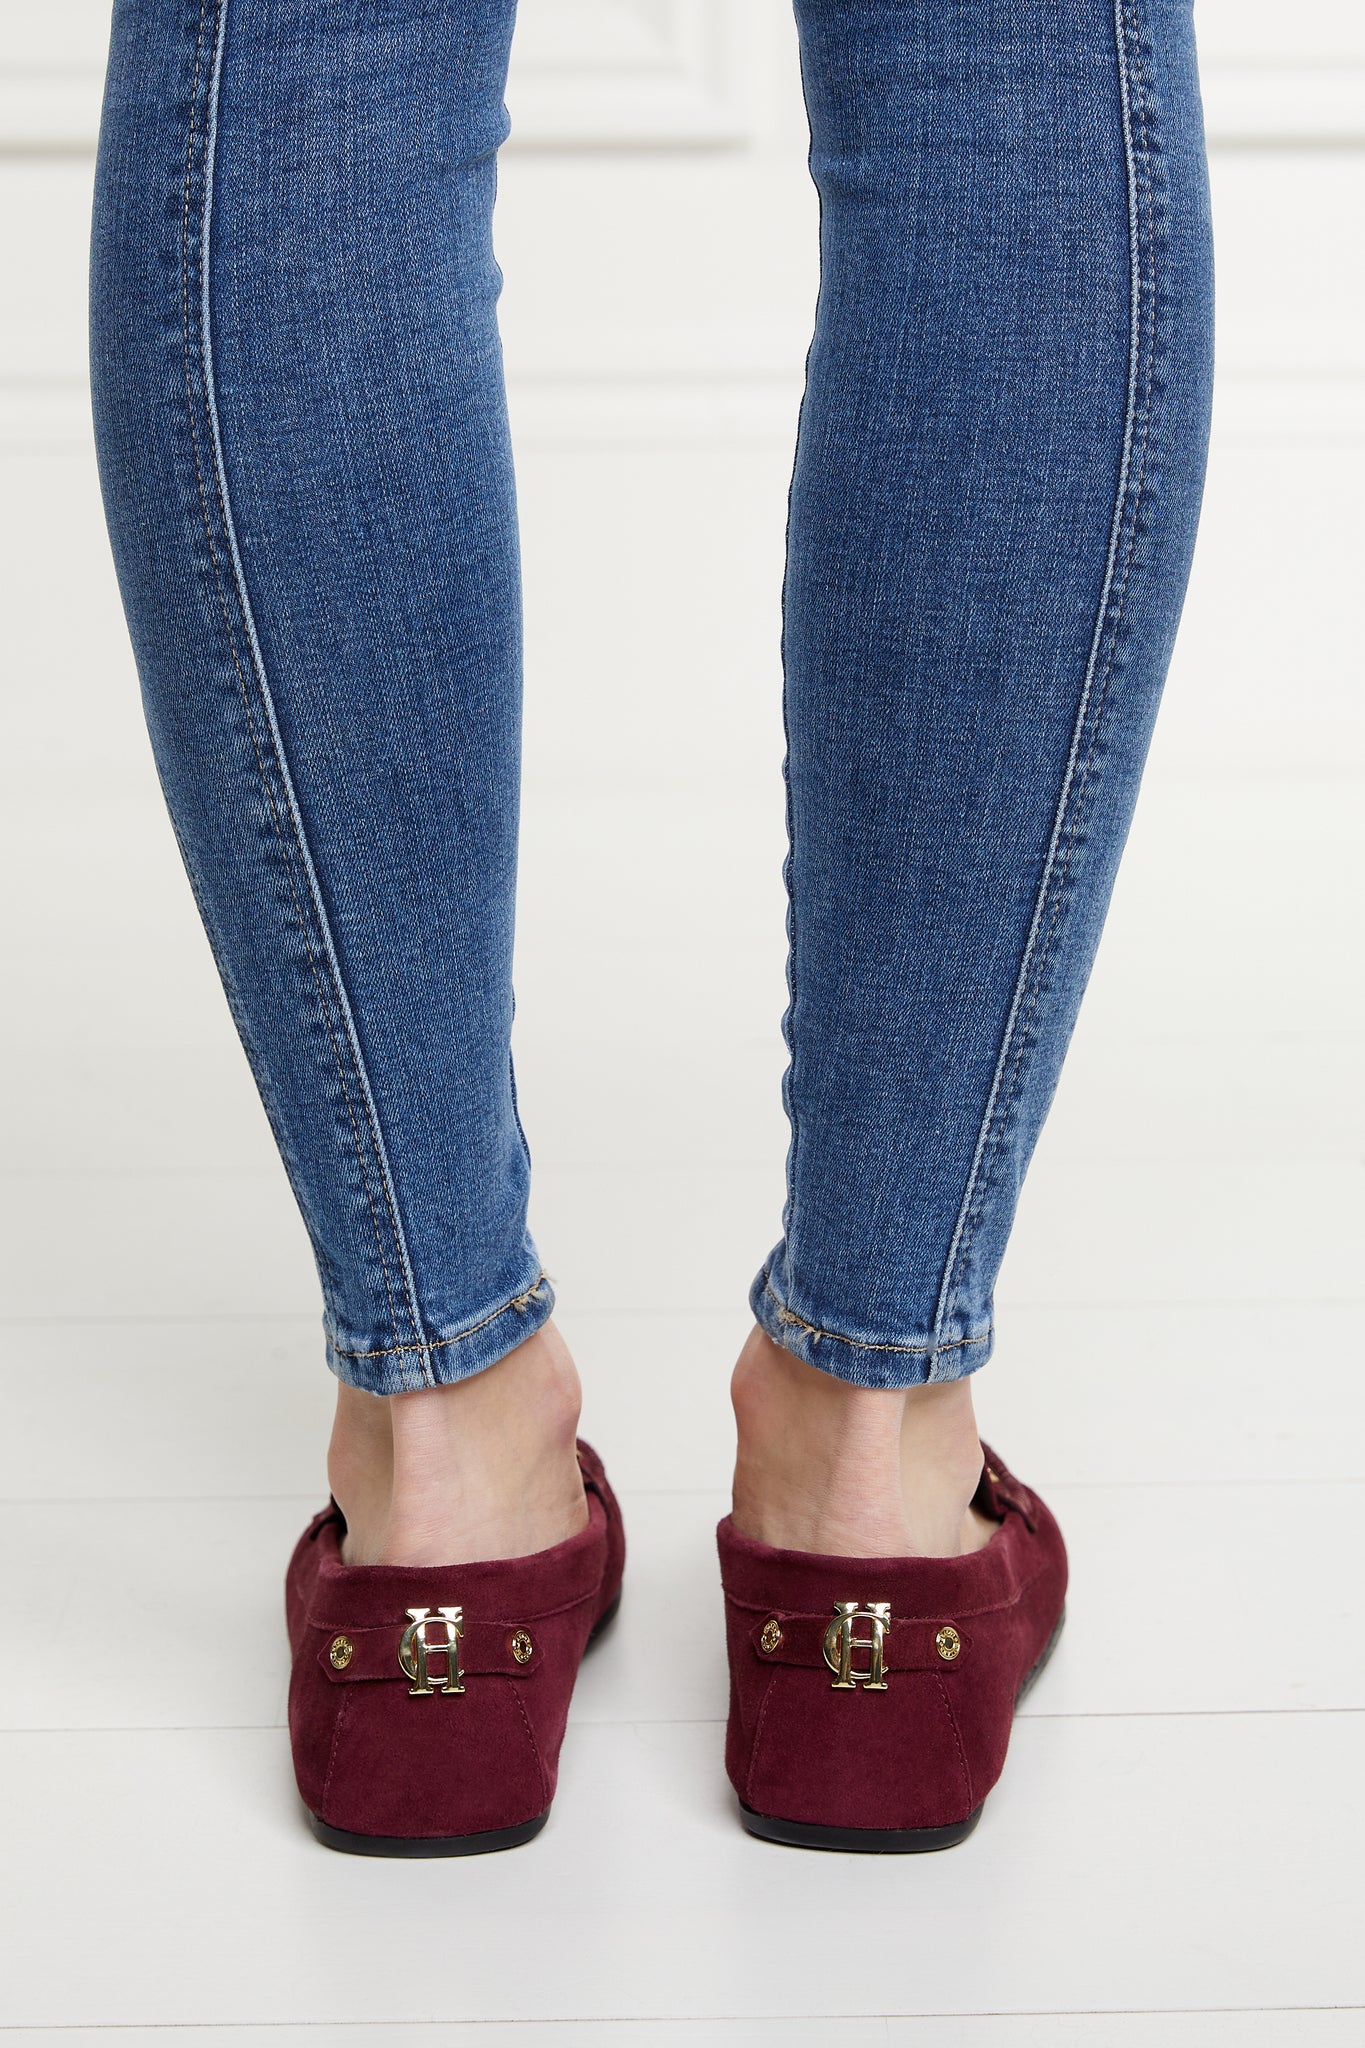 Back of classic deep red suede loafers with a leather sole and gold hardware paired with skinny denim jeans